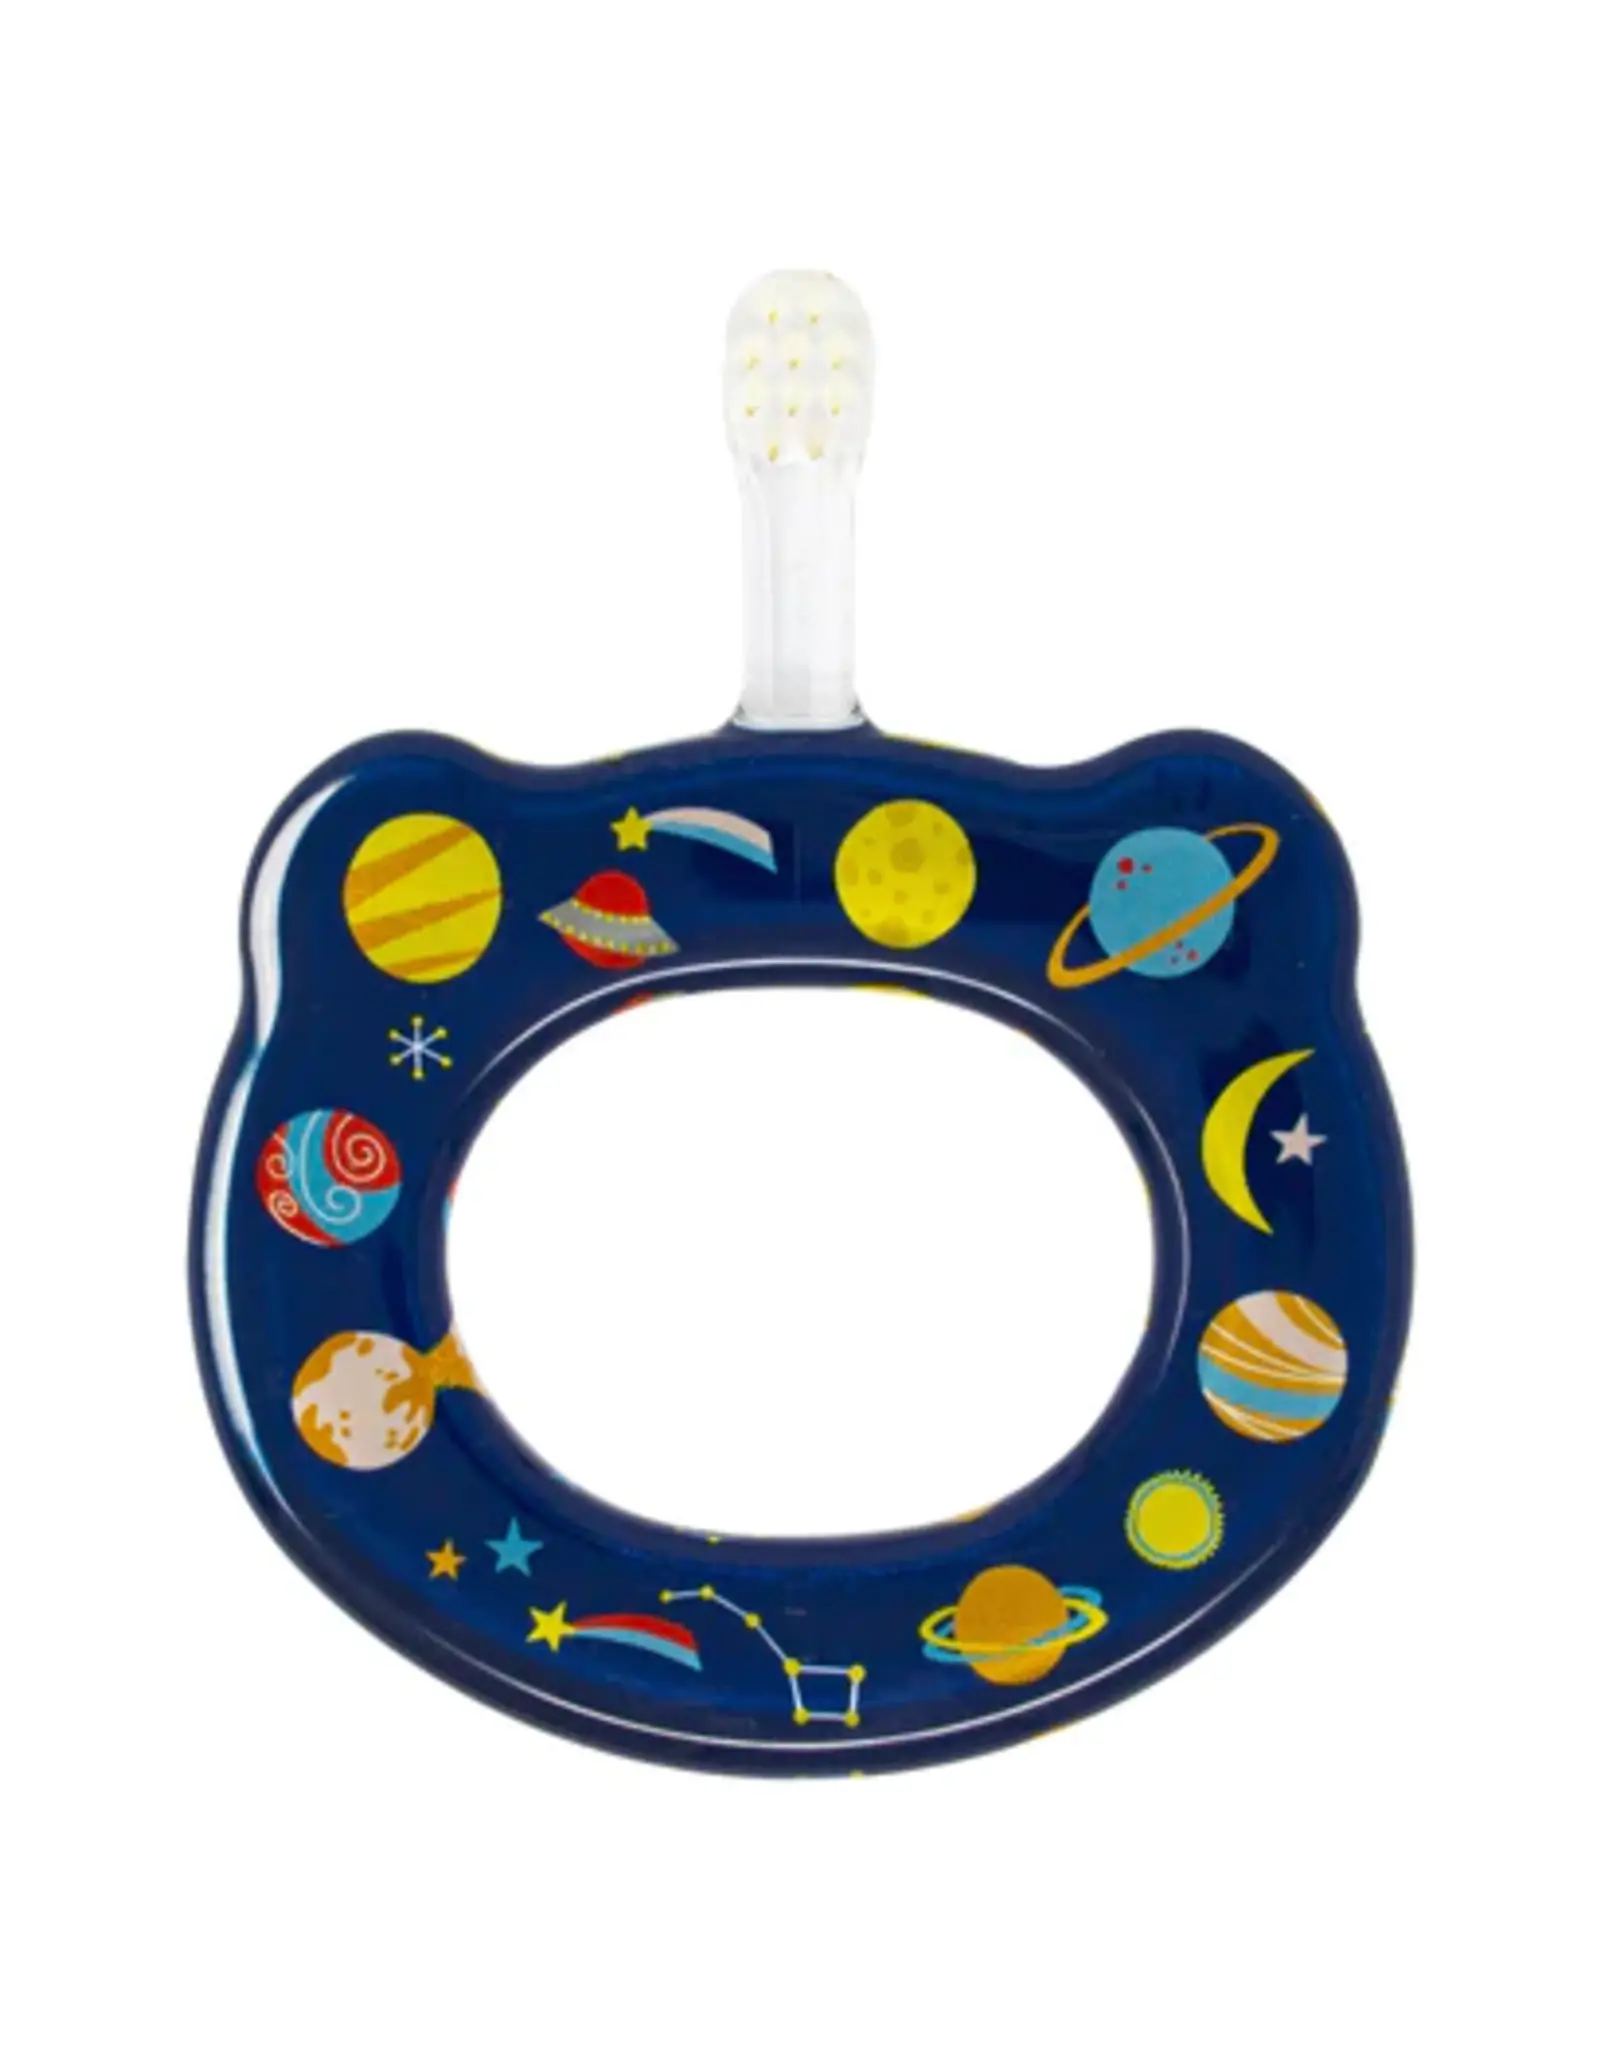 Hamico Baby Hamico Toothbrush - Space